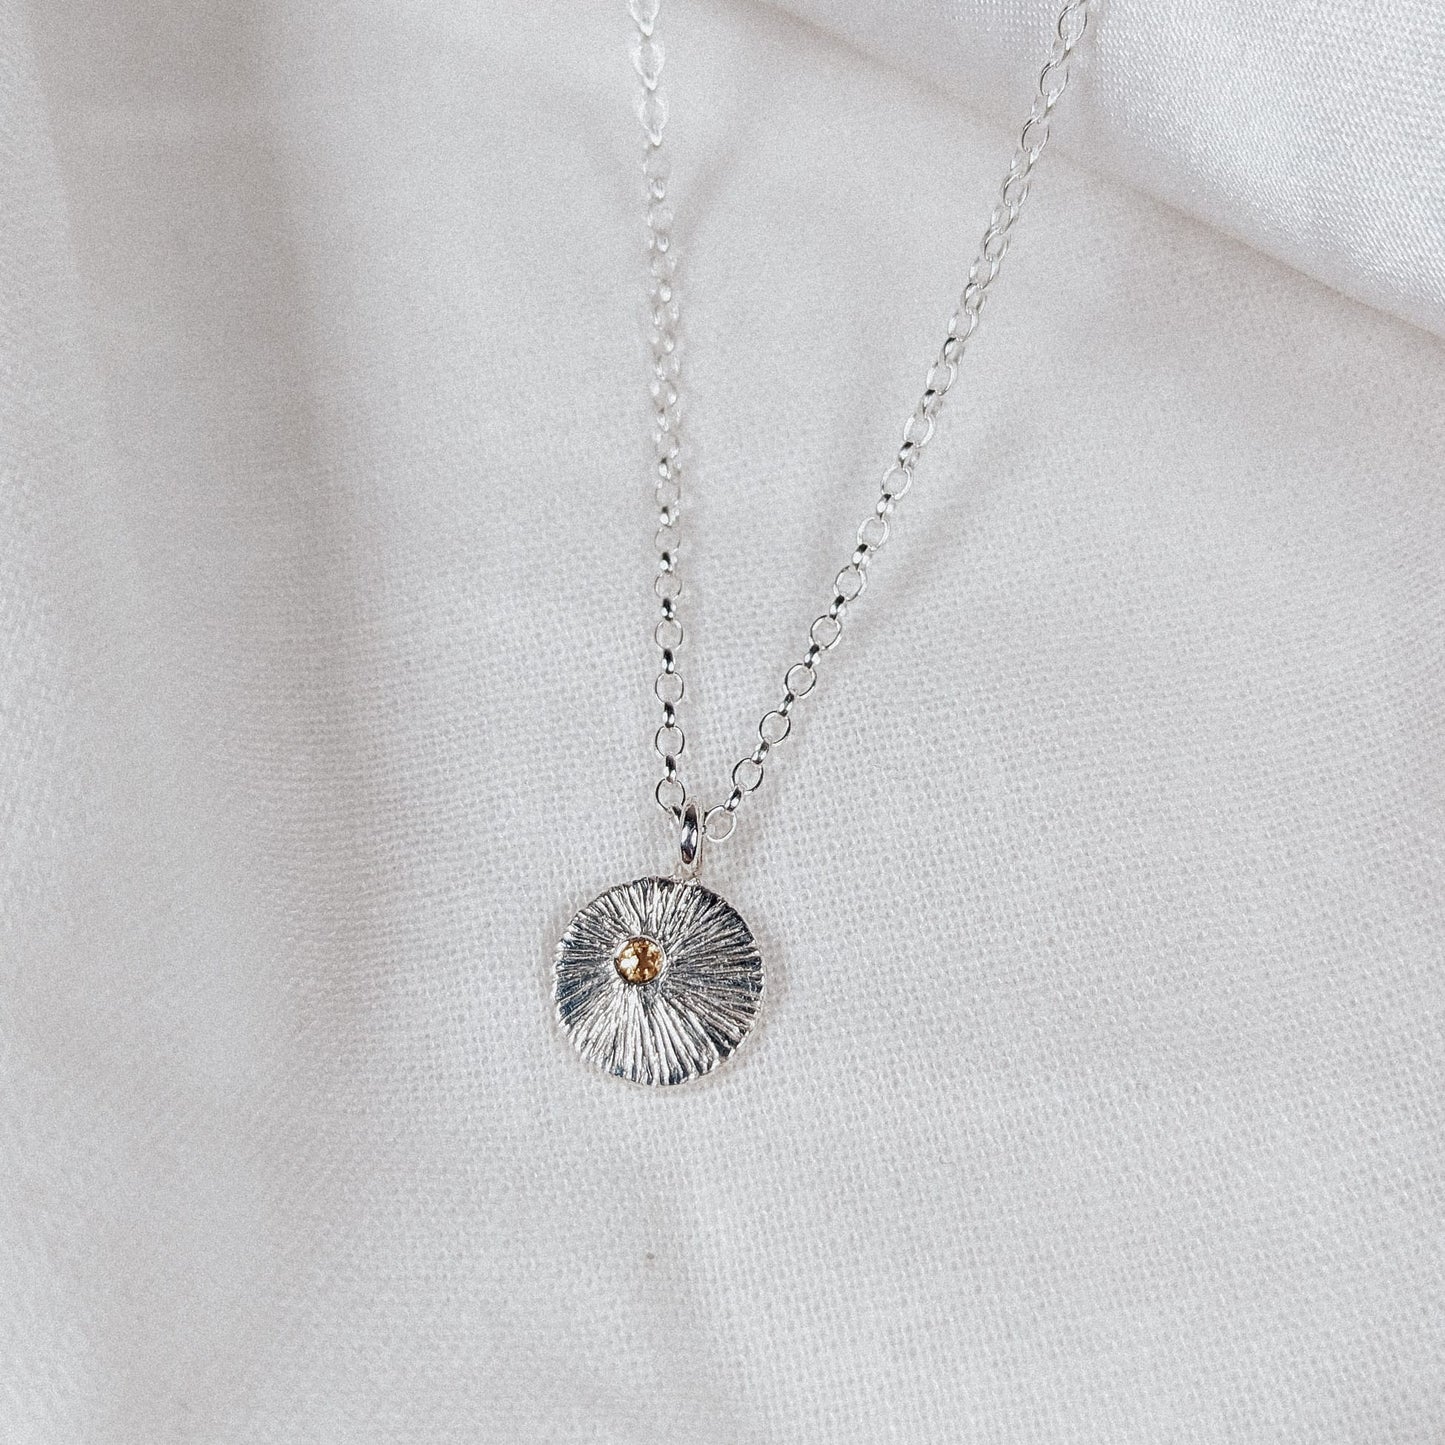 Radiant pendant | Circle coin necklace with gemstone